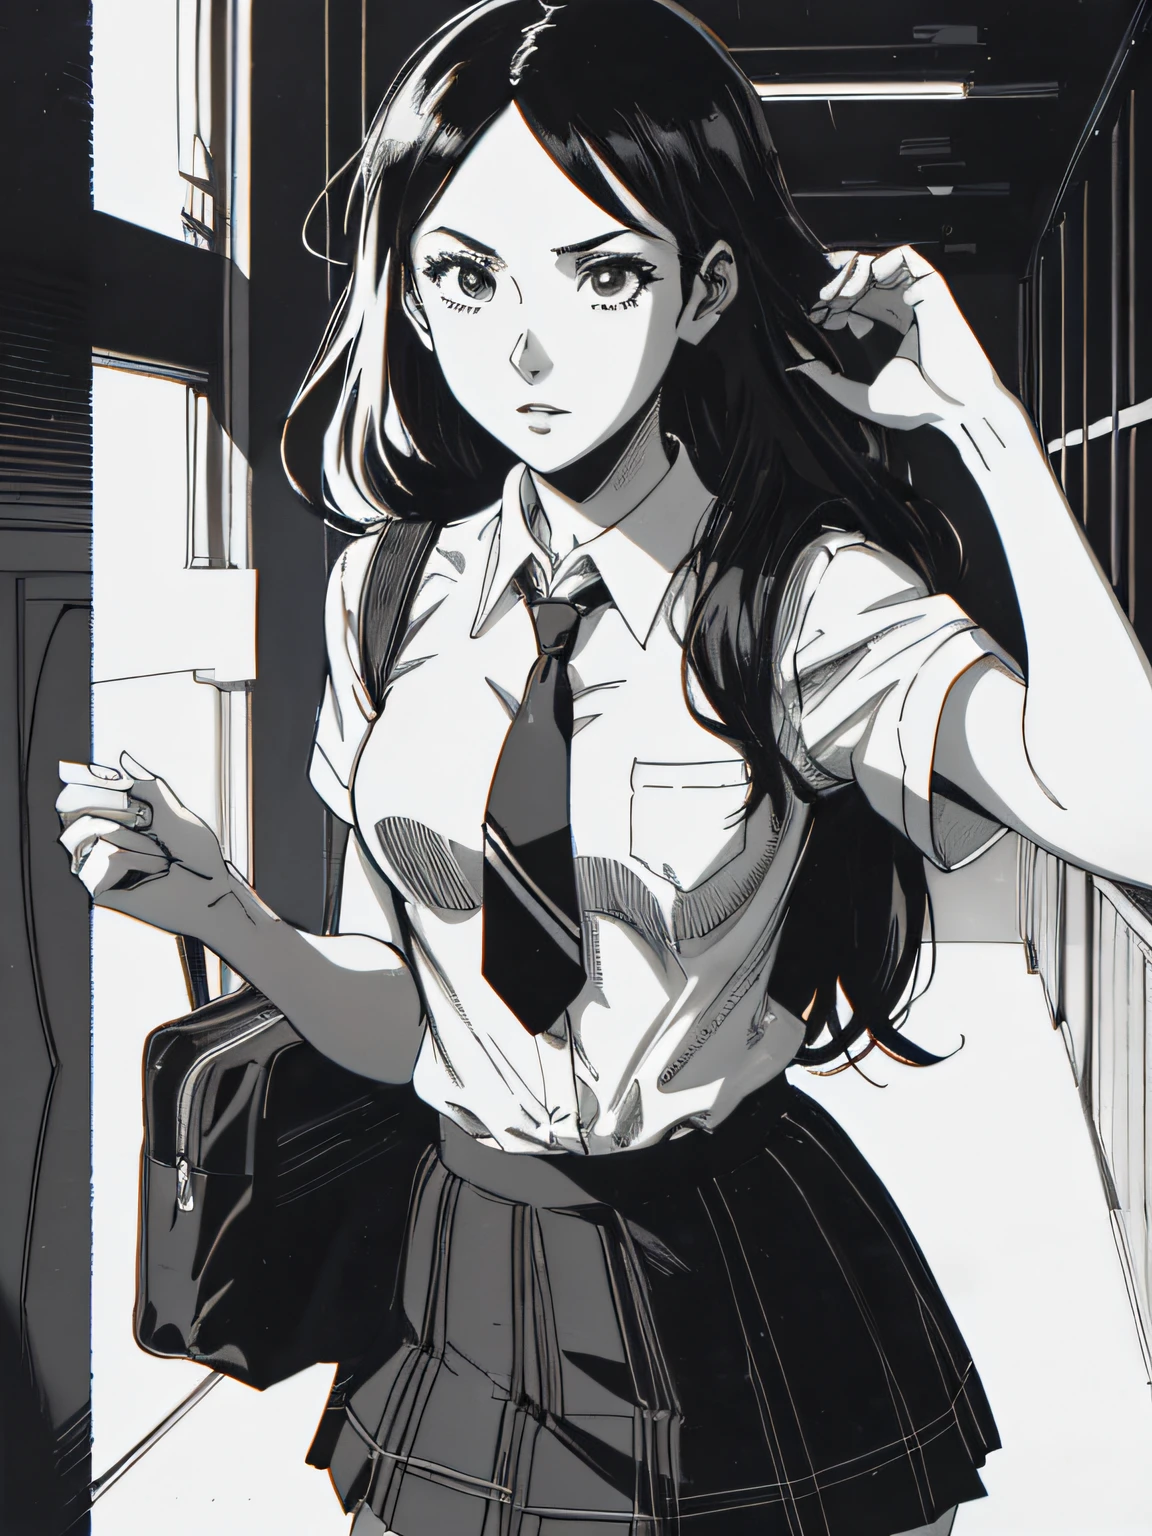 of the highest quality, Best Quality,超A high resolution, hight resolution, (masutepiece), (Comic noir style illustration), (linear art_Anime),(black-and-white:1.0),(monotone_highcontrast),hi-school girl,high-school uniform、neck tie、blazers、skirt by the,Inside the school_the complex background,(lora Add More Detail:1.2)